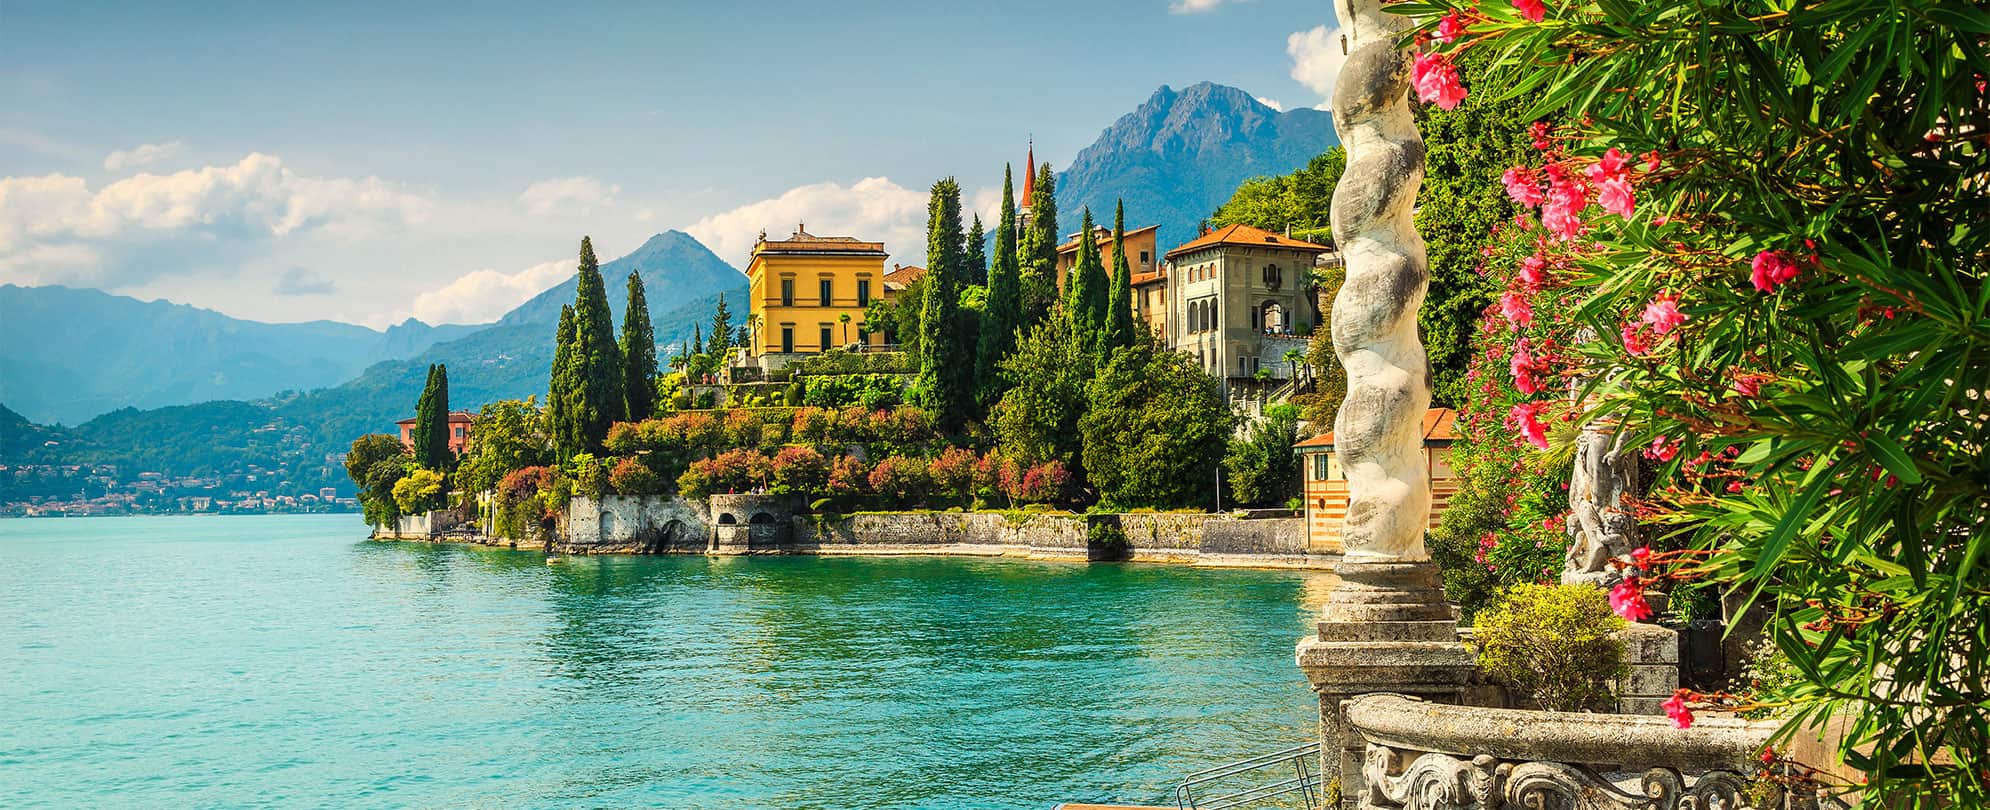 A bright blue lake surrounded by mountains and tall green trees at Villa Monastero on Lake Como in Verenna, Italy.